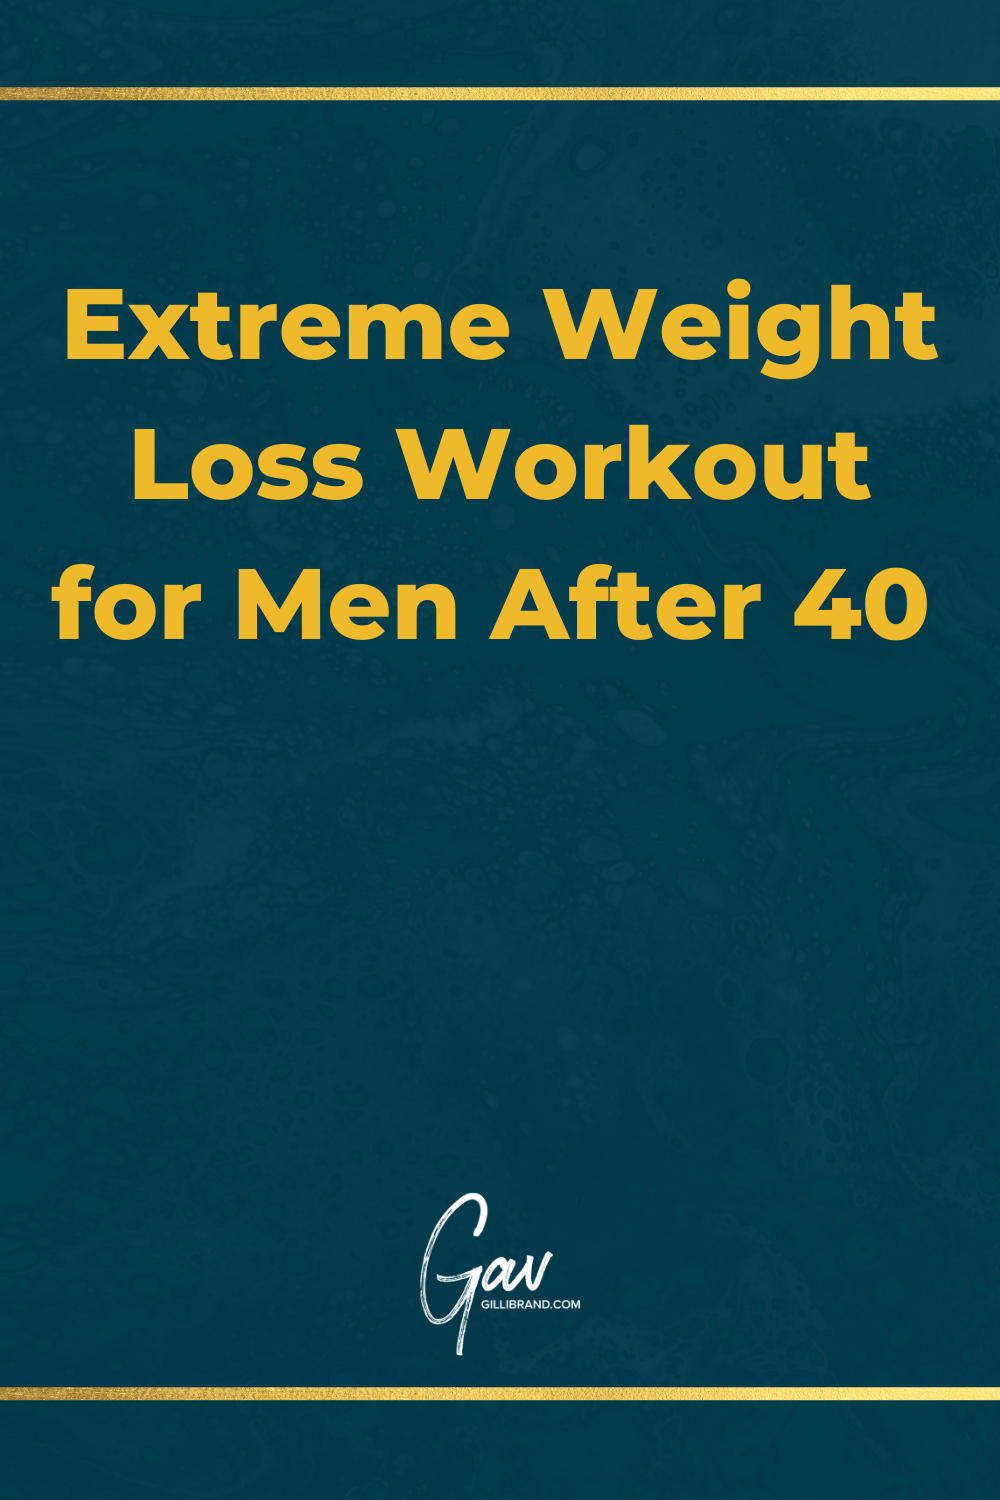 Featured image for “Extreme Weight Loss Workout for Men After 40”